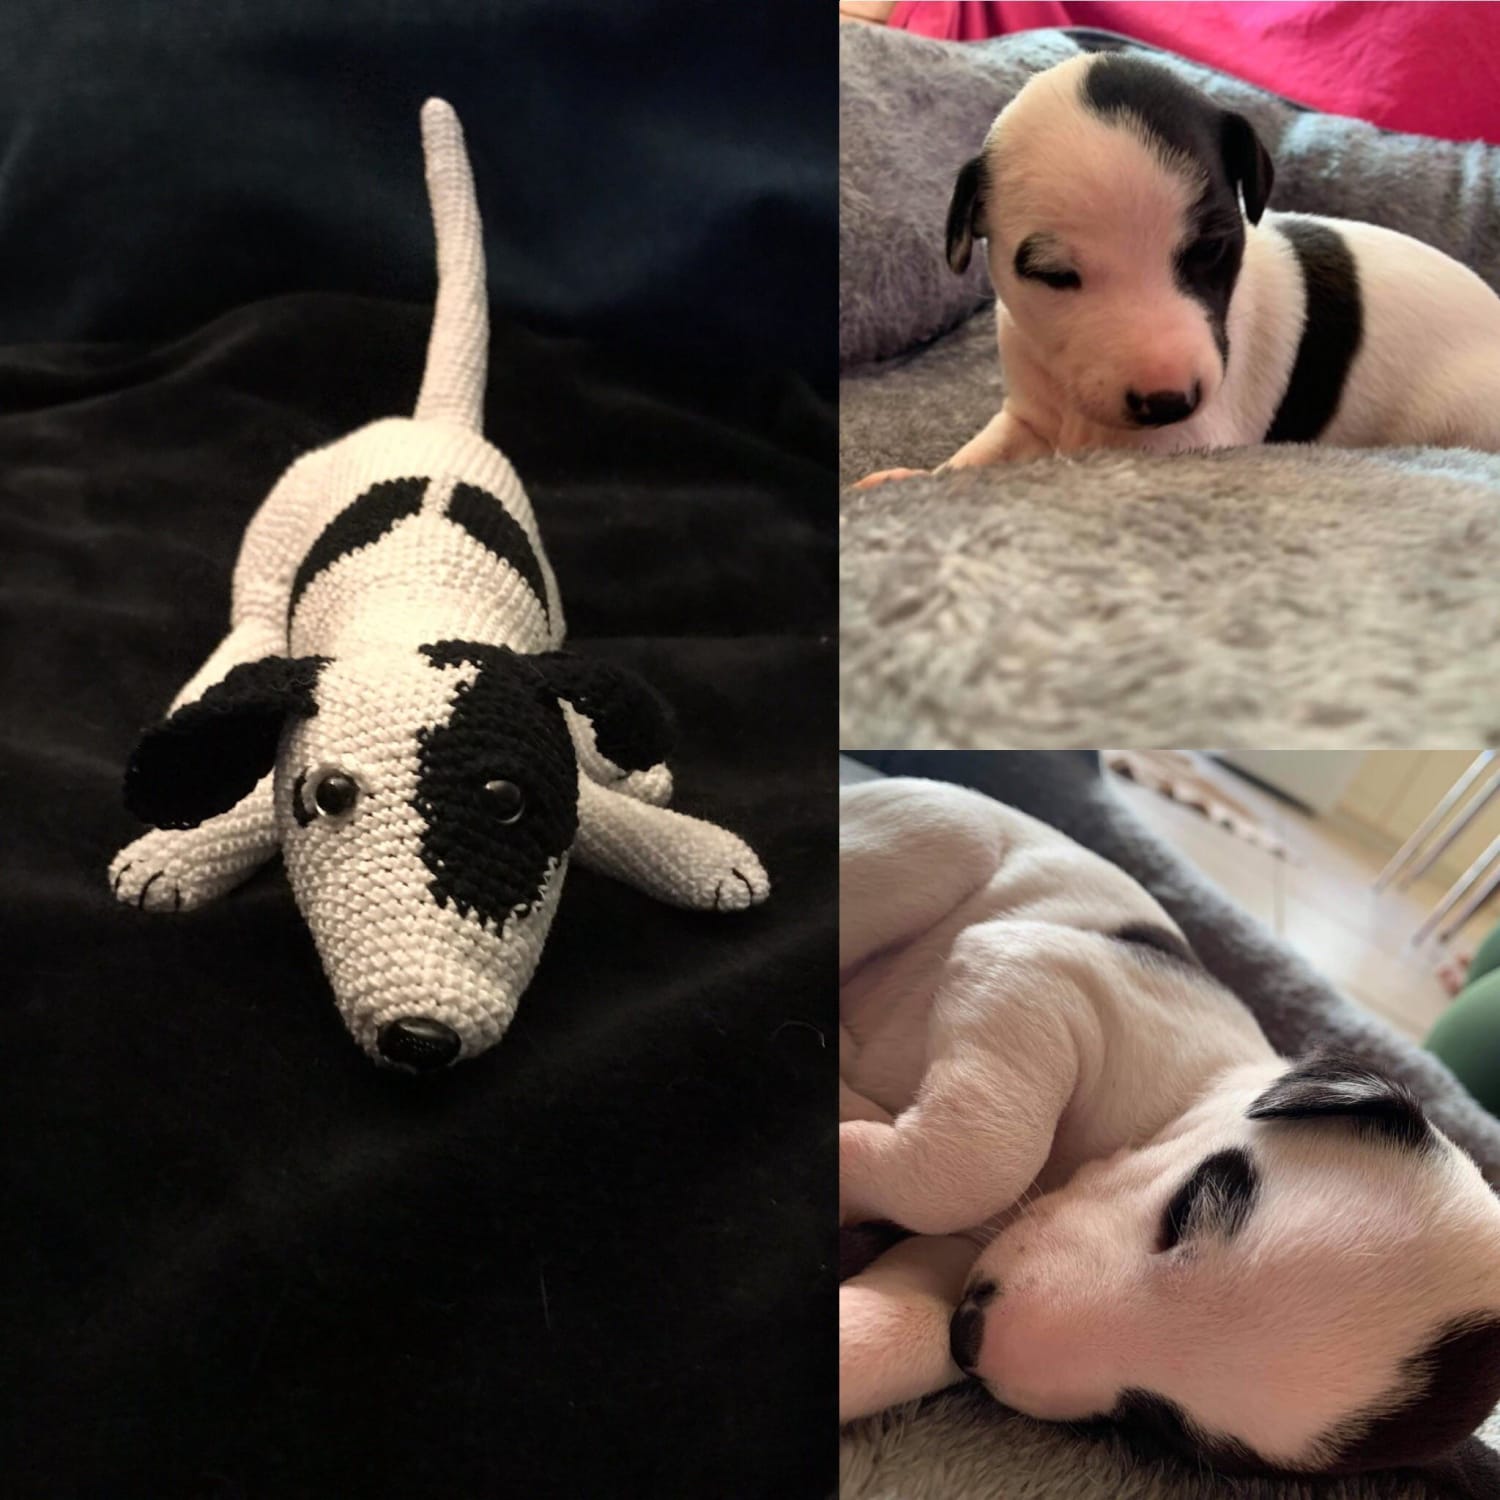 I crocheted the puppy! Meet whippet Goode and her cotton body double.